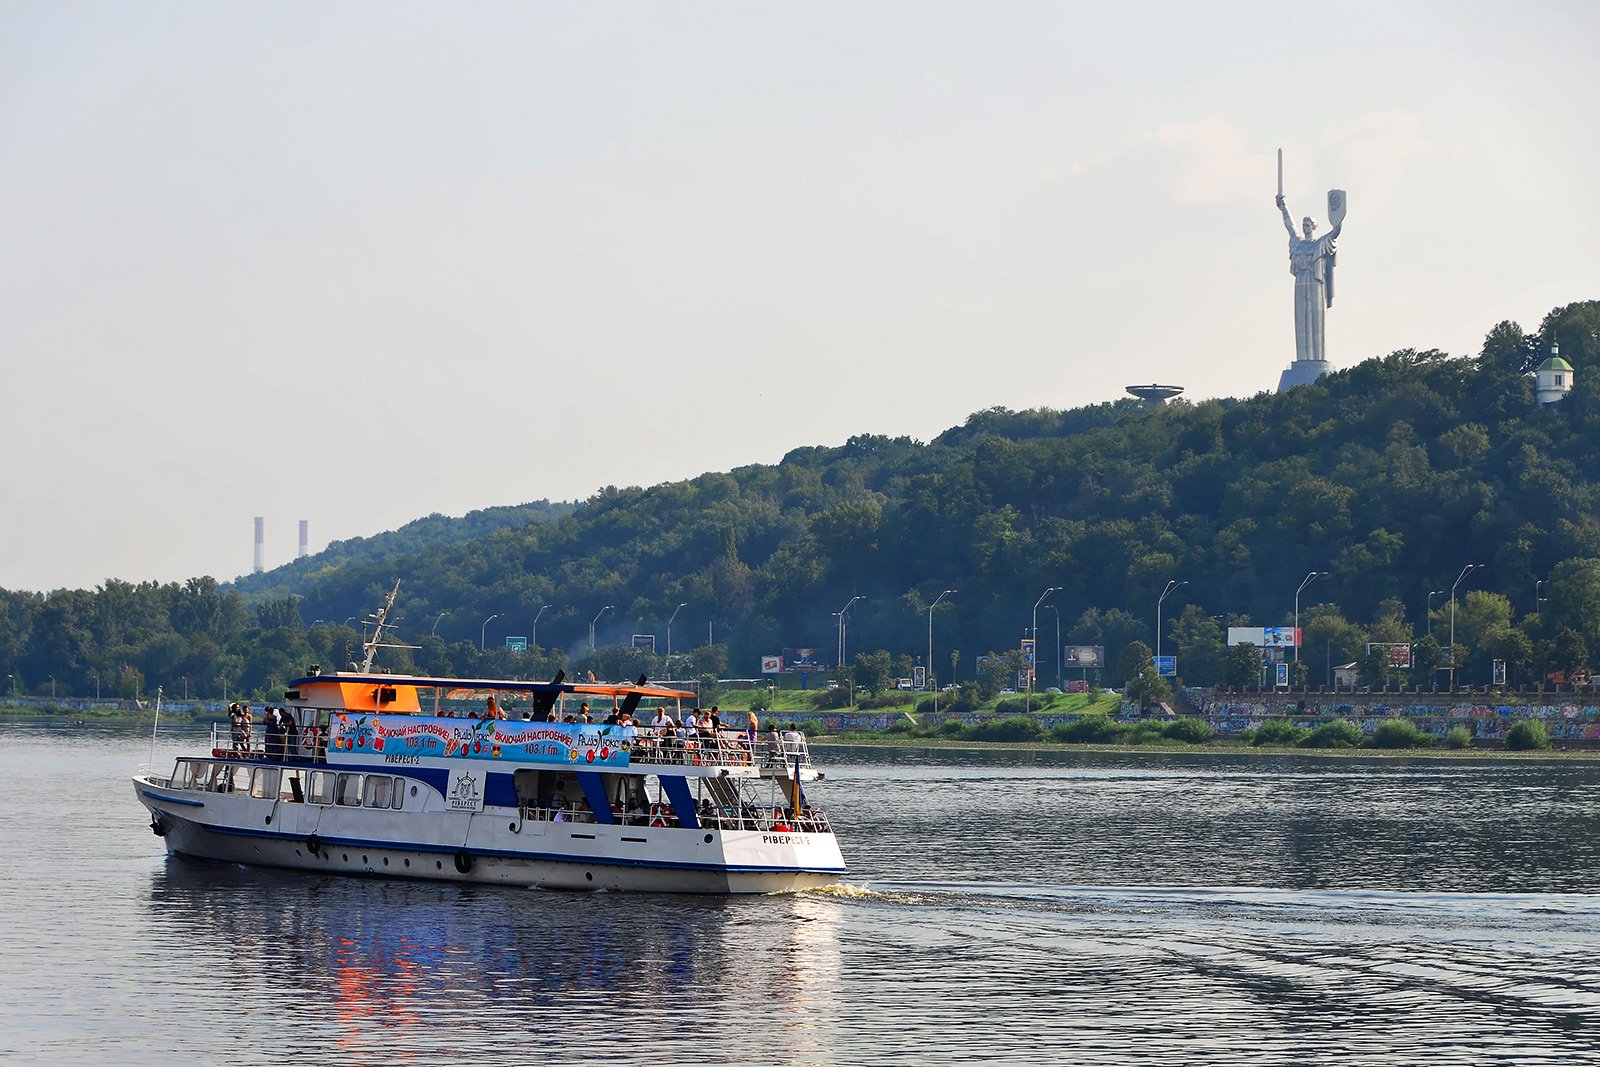 How to ride along the Dnieper on the river tram in Kiev